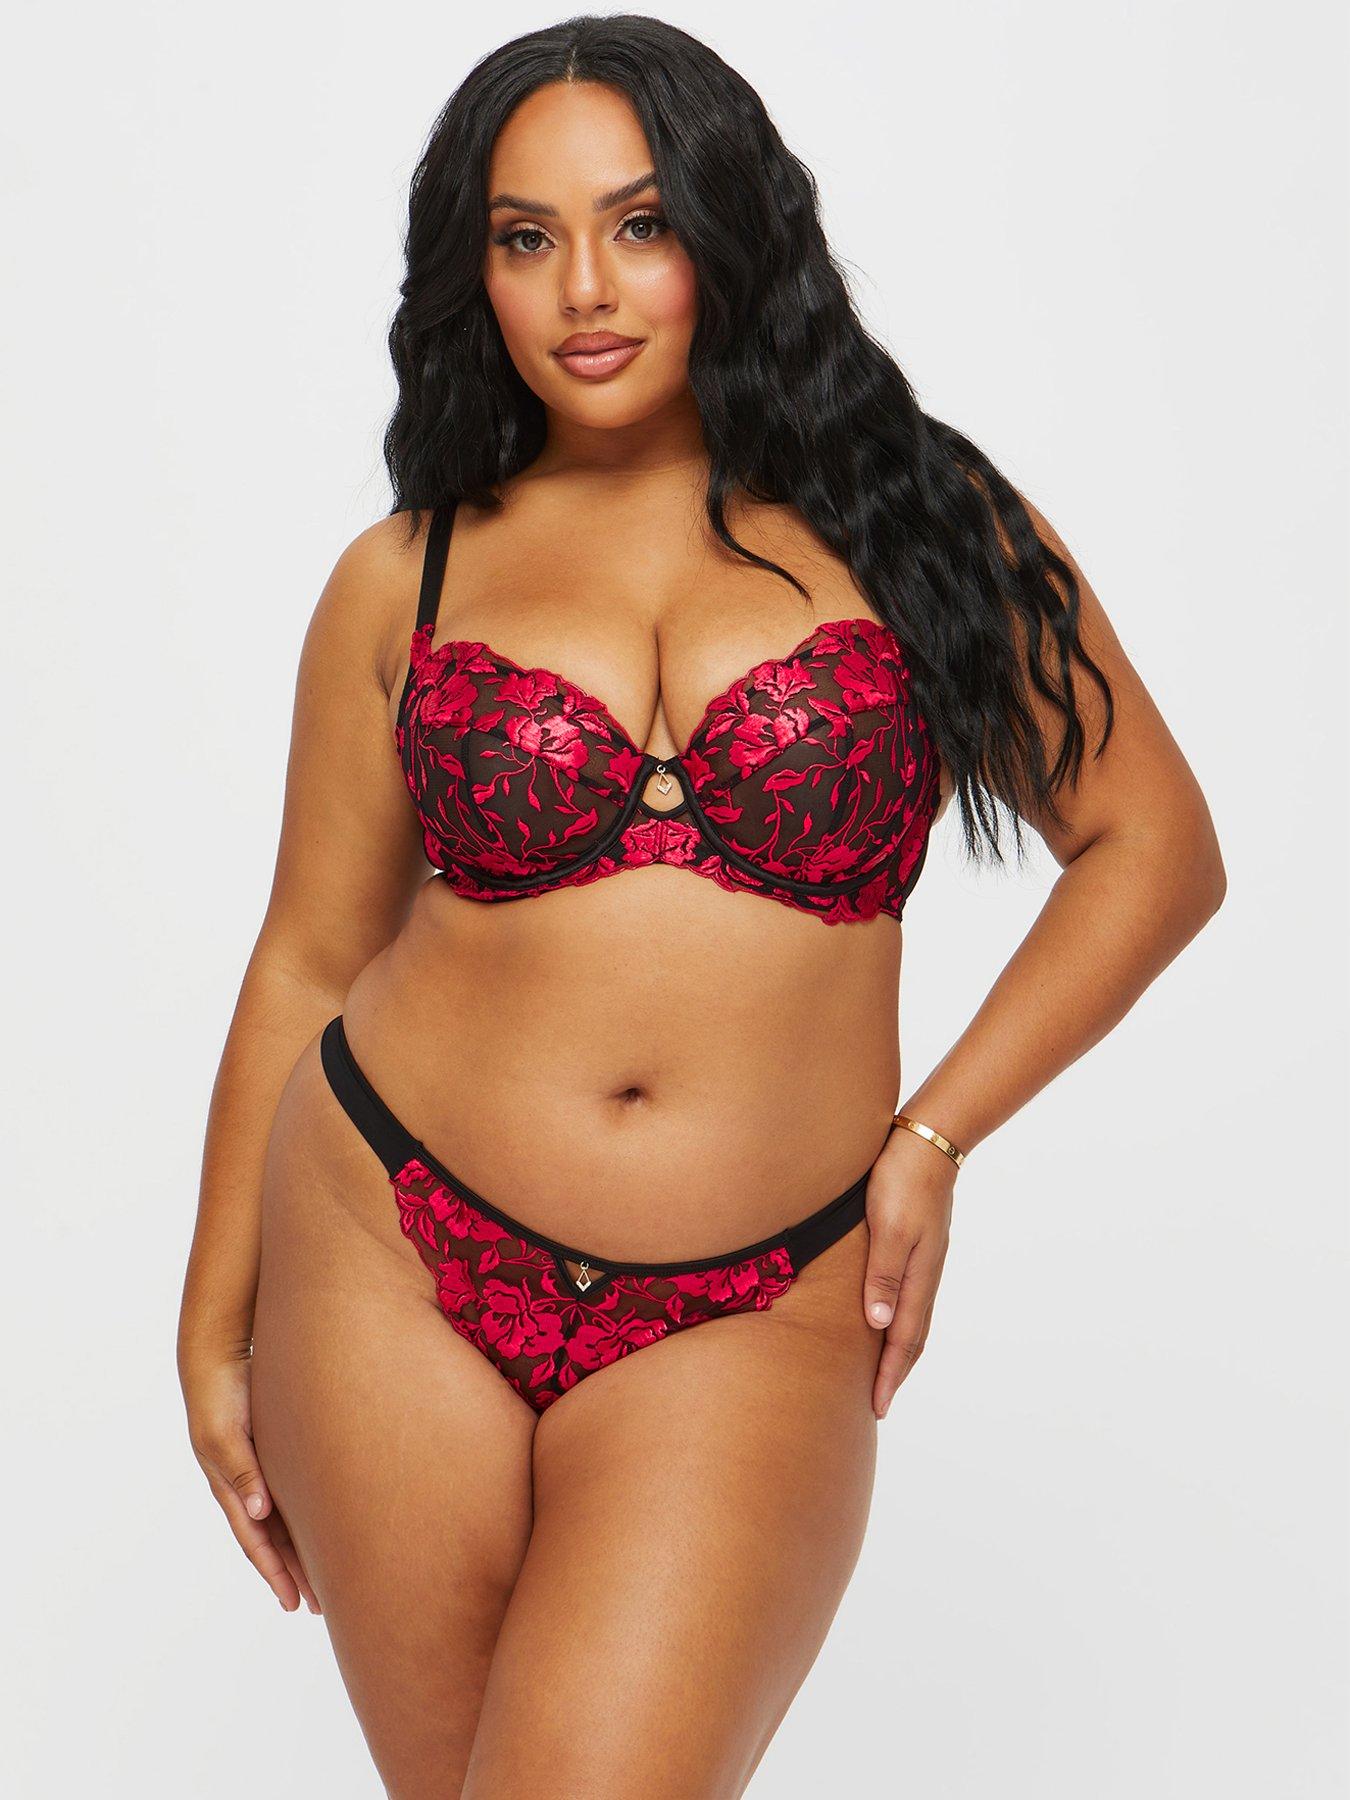 Ann Summers Bras Sexy Lace Planet Padded Plunge - Light Orange